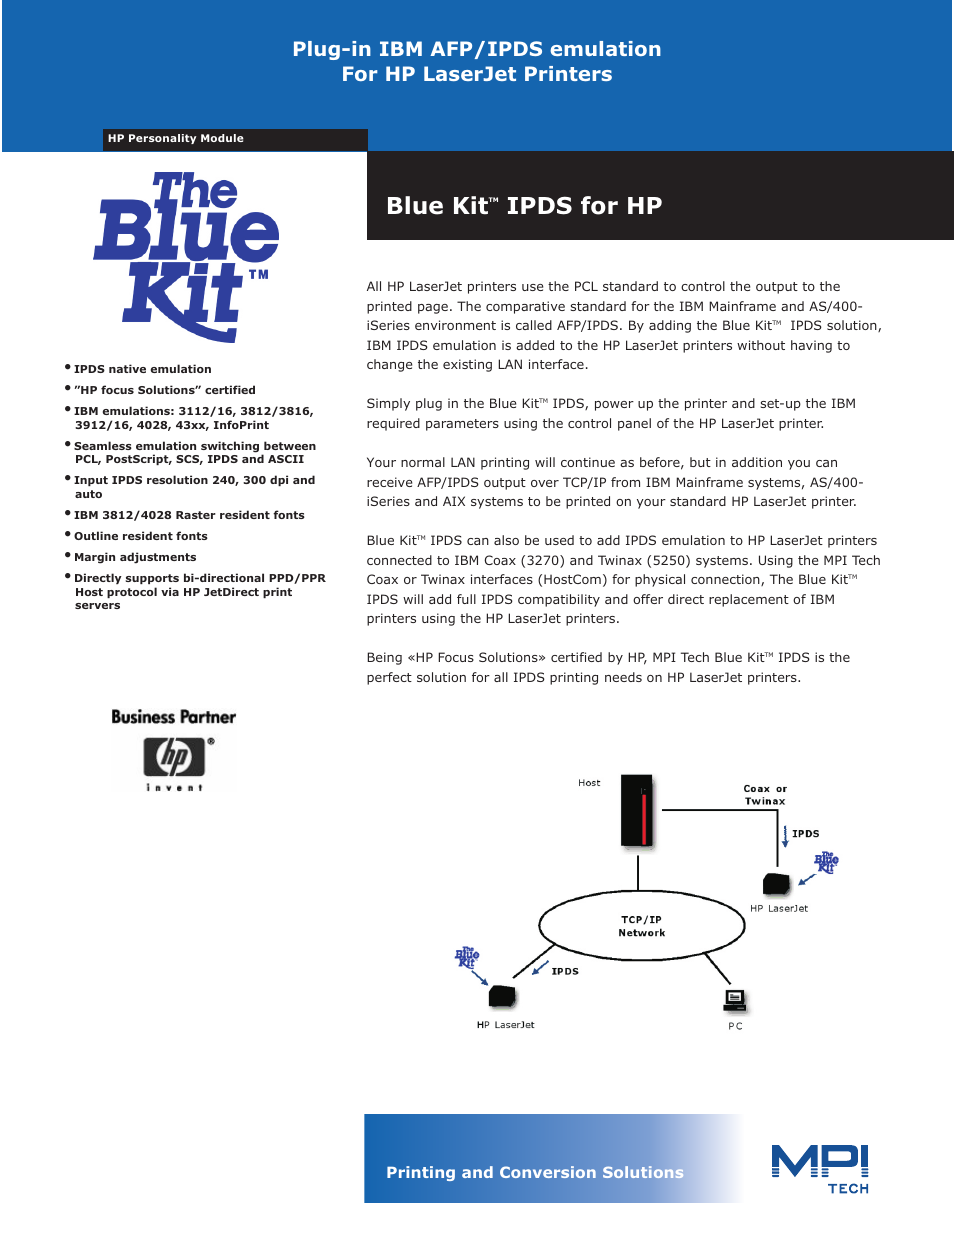 The Blue Kit IPDS for HP